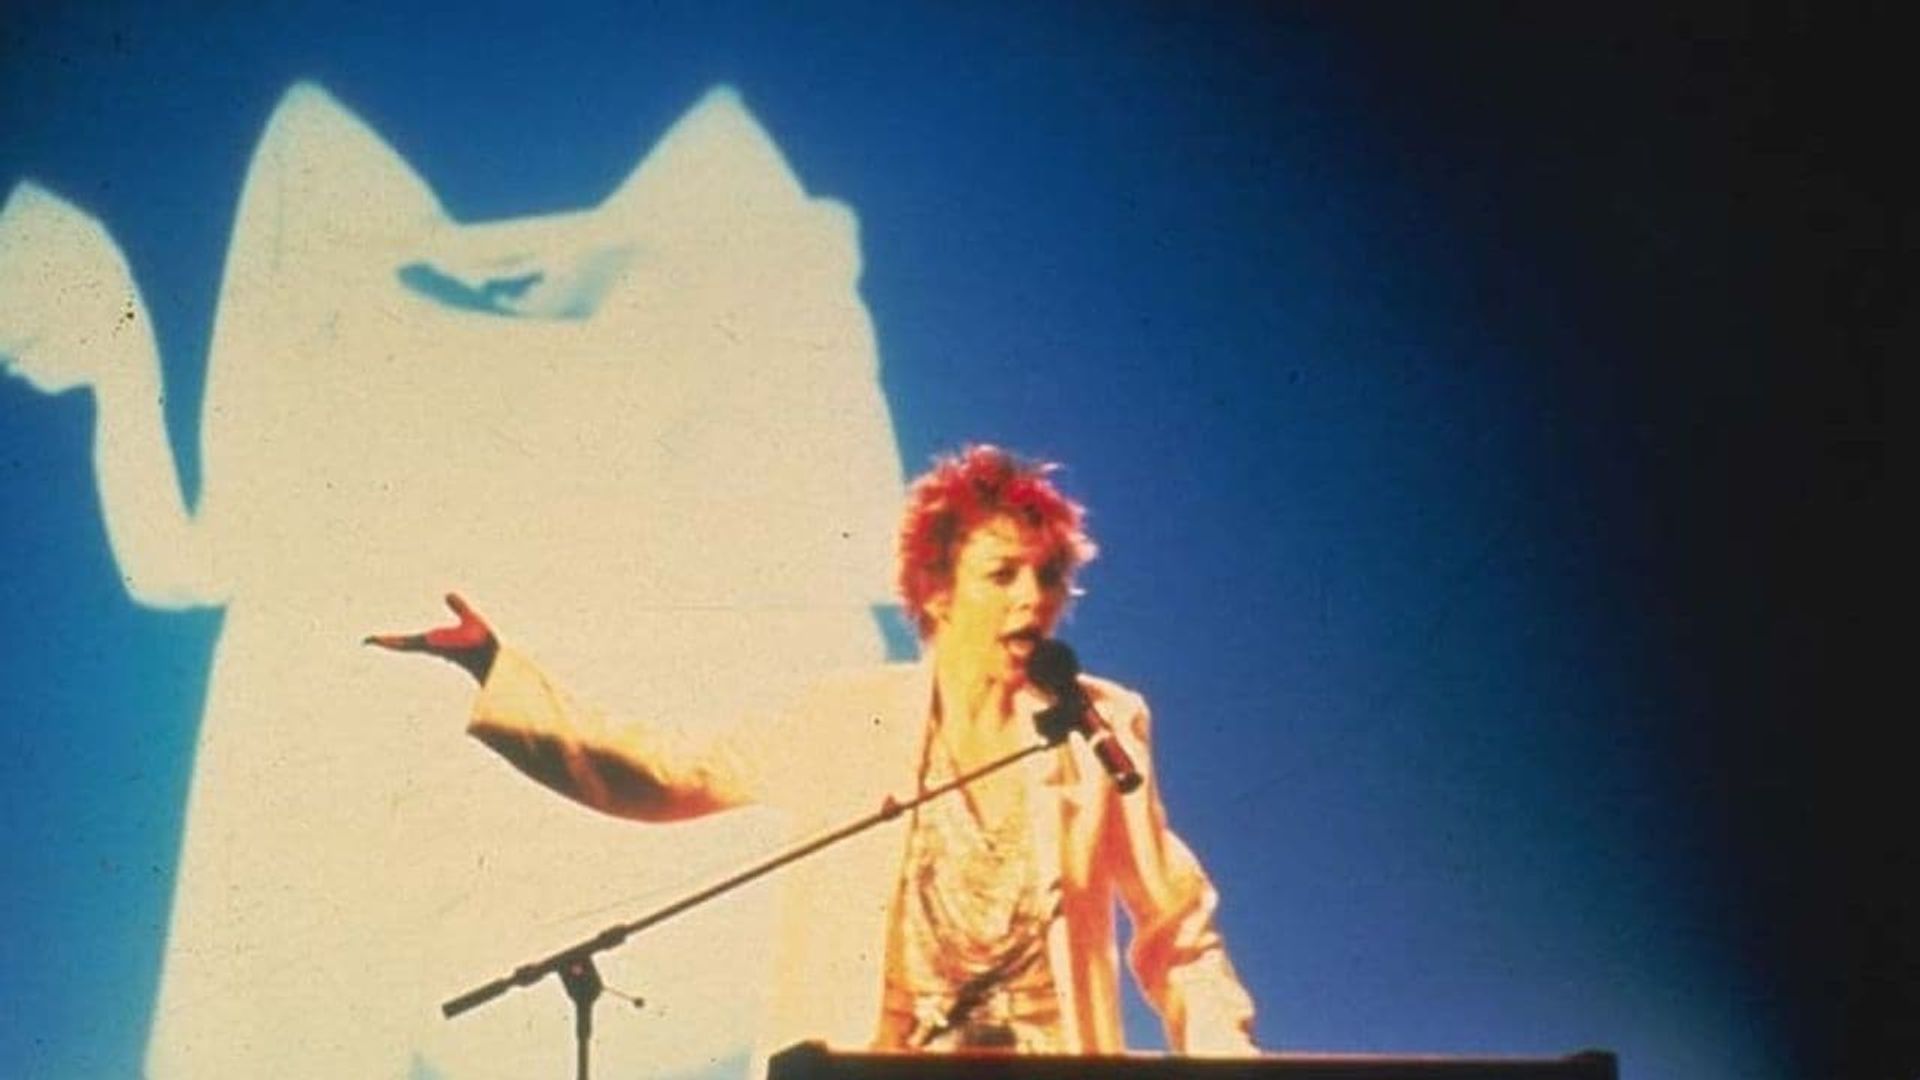 Home of the Brave: A Film by Laurie Anderson background